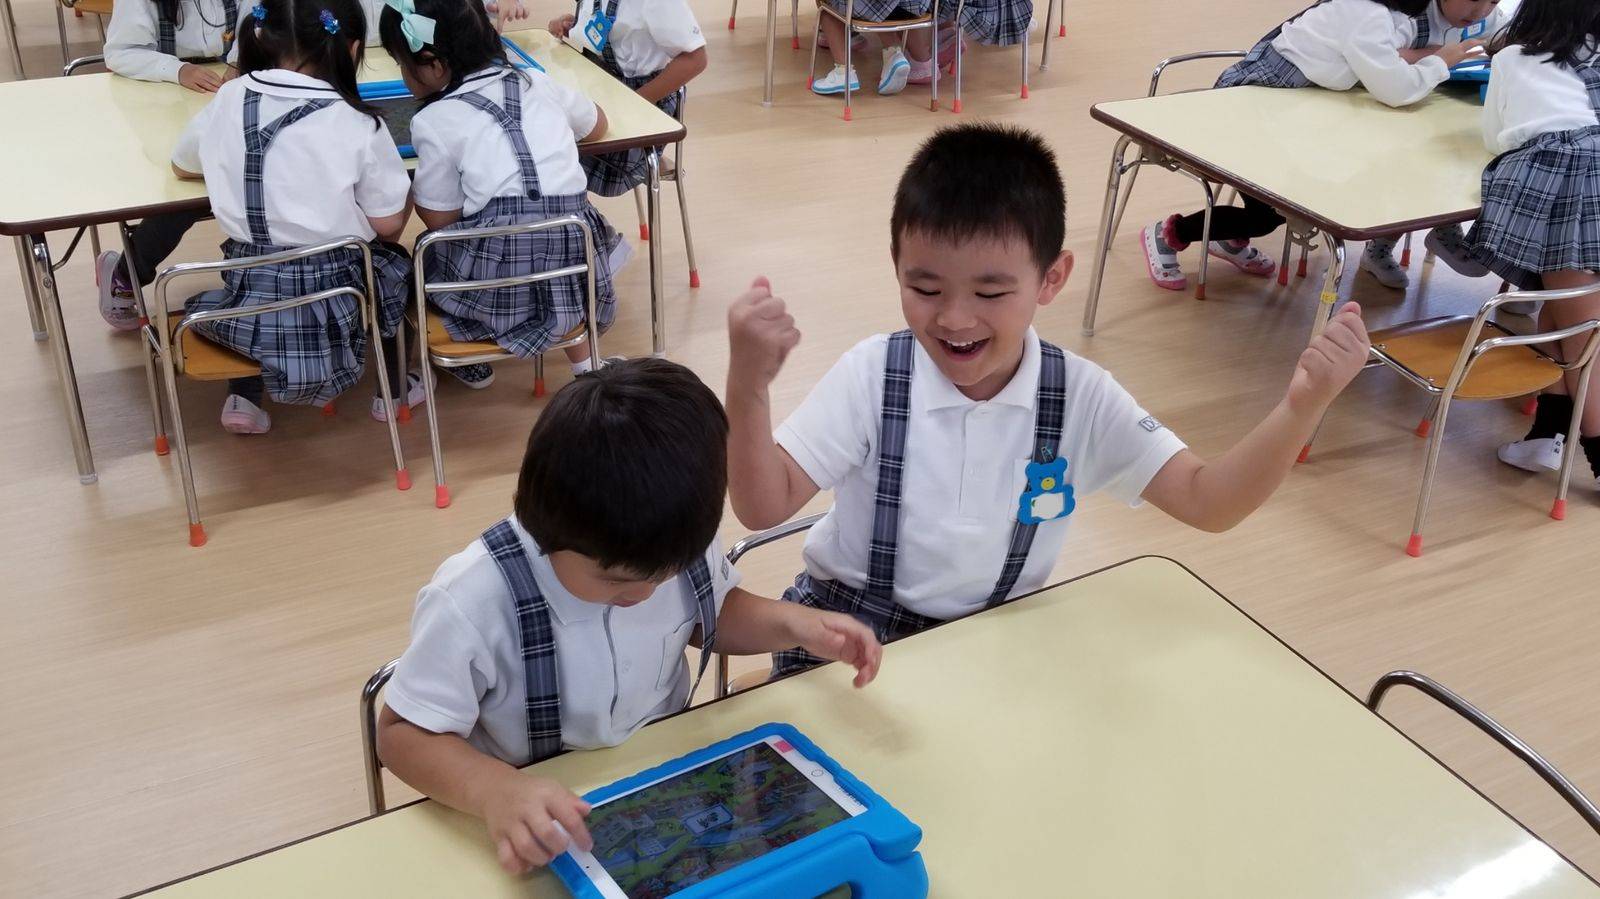 Child-watching gadgets gain foothold in Japan